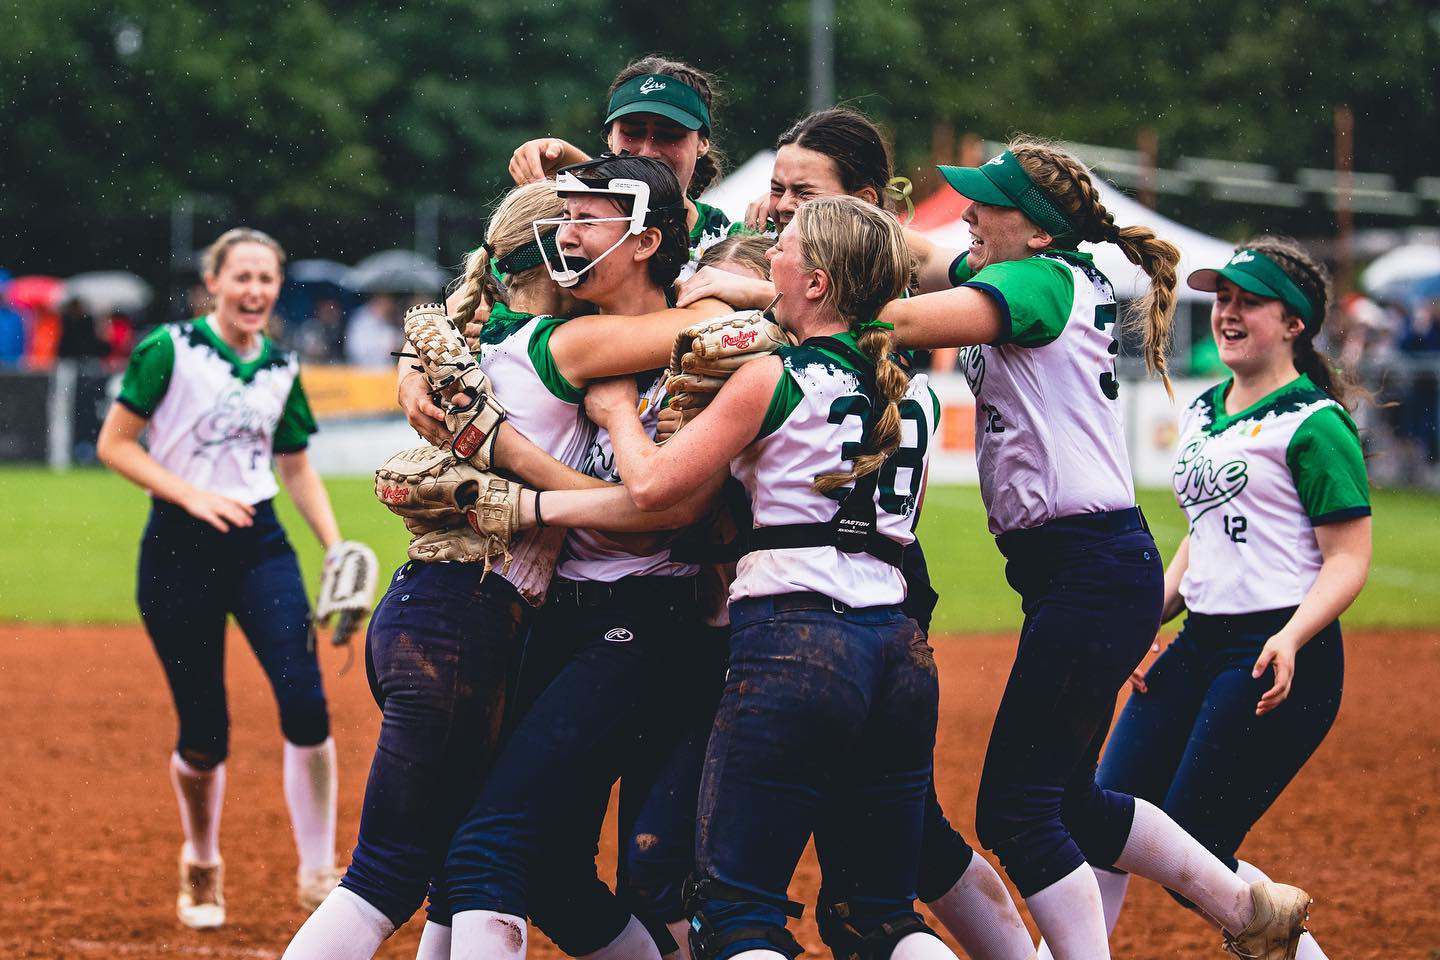 Softball Ireland Secures Bronze at Euro Championships - Sport for Business